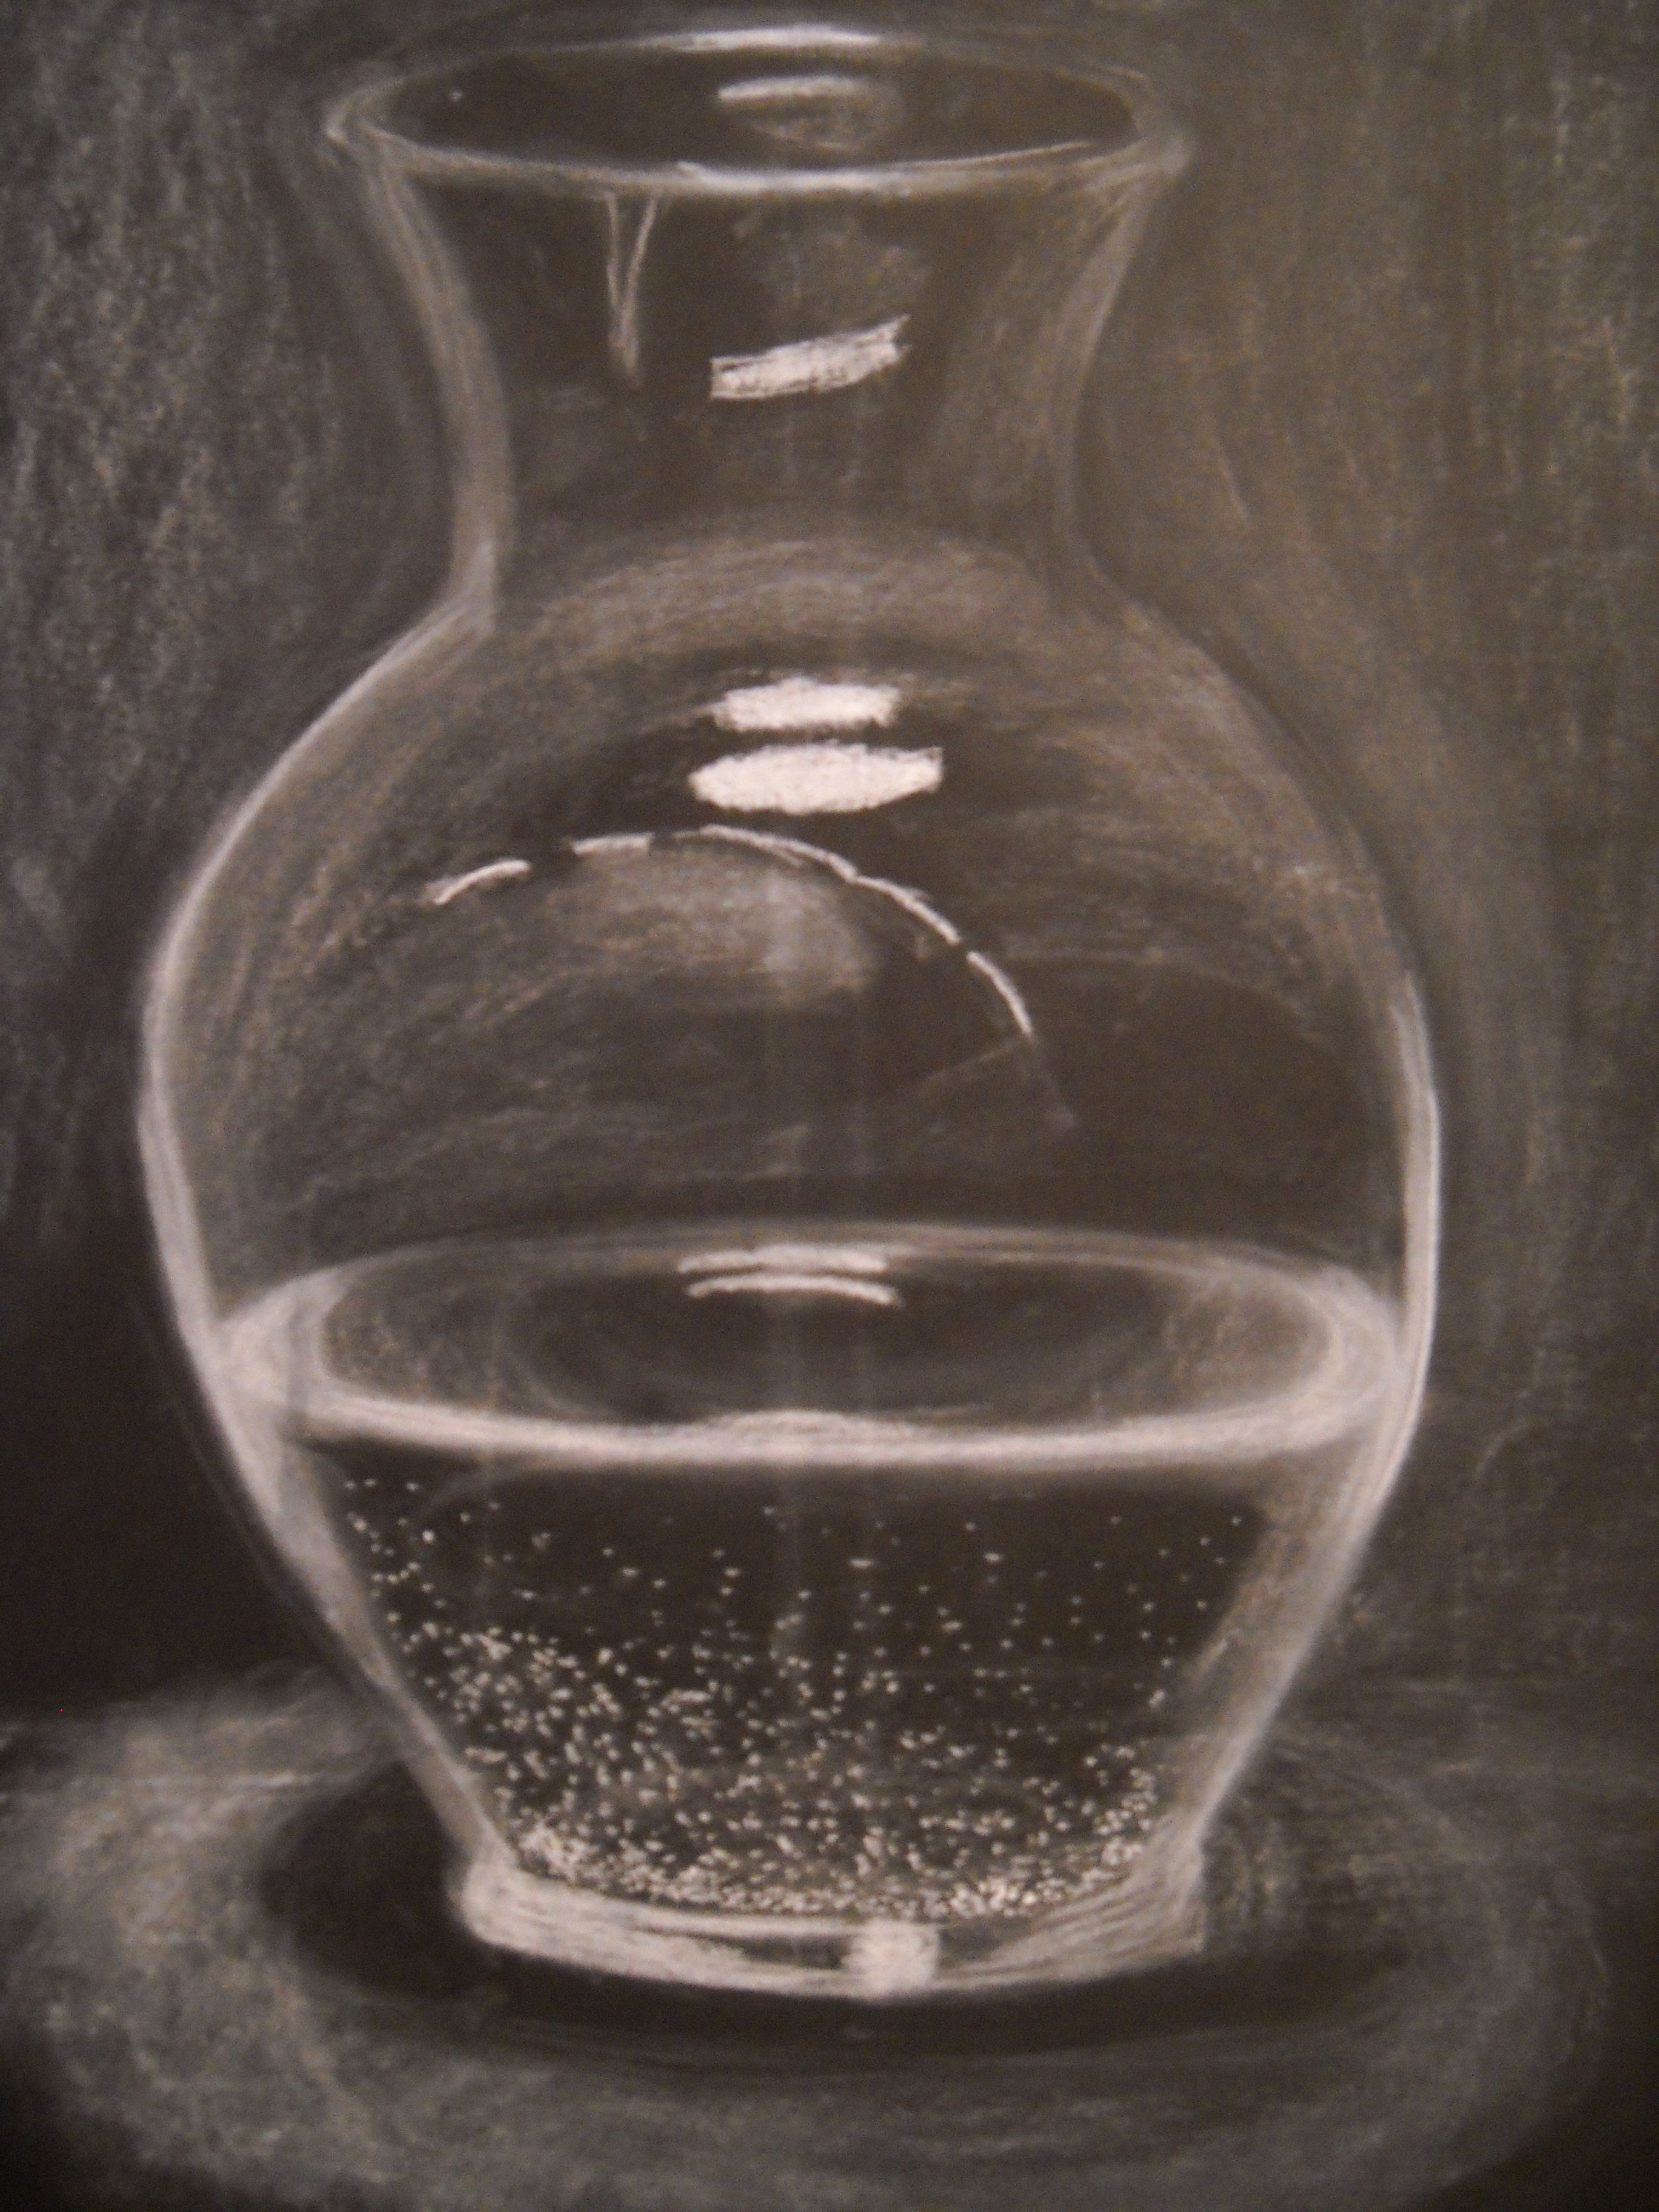 11 Wonderful Low Round Glass Vase 2024 free download low round glass vase of glass vase filled with water done in white chalk on black drawing intended for glass vase filled with water done in white chalk on black drawing paper